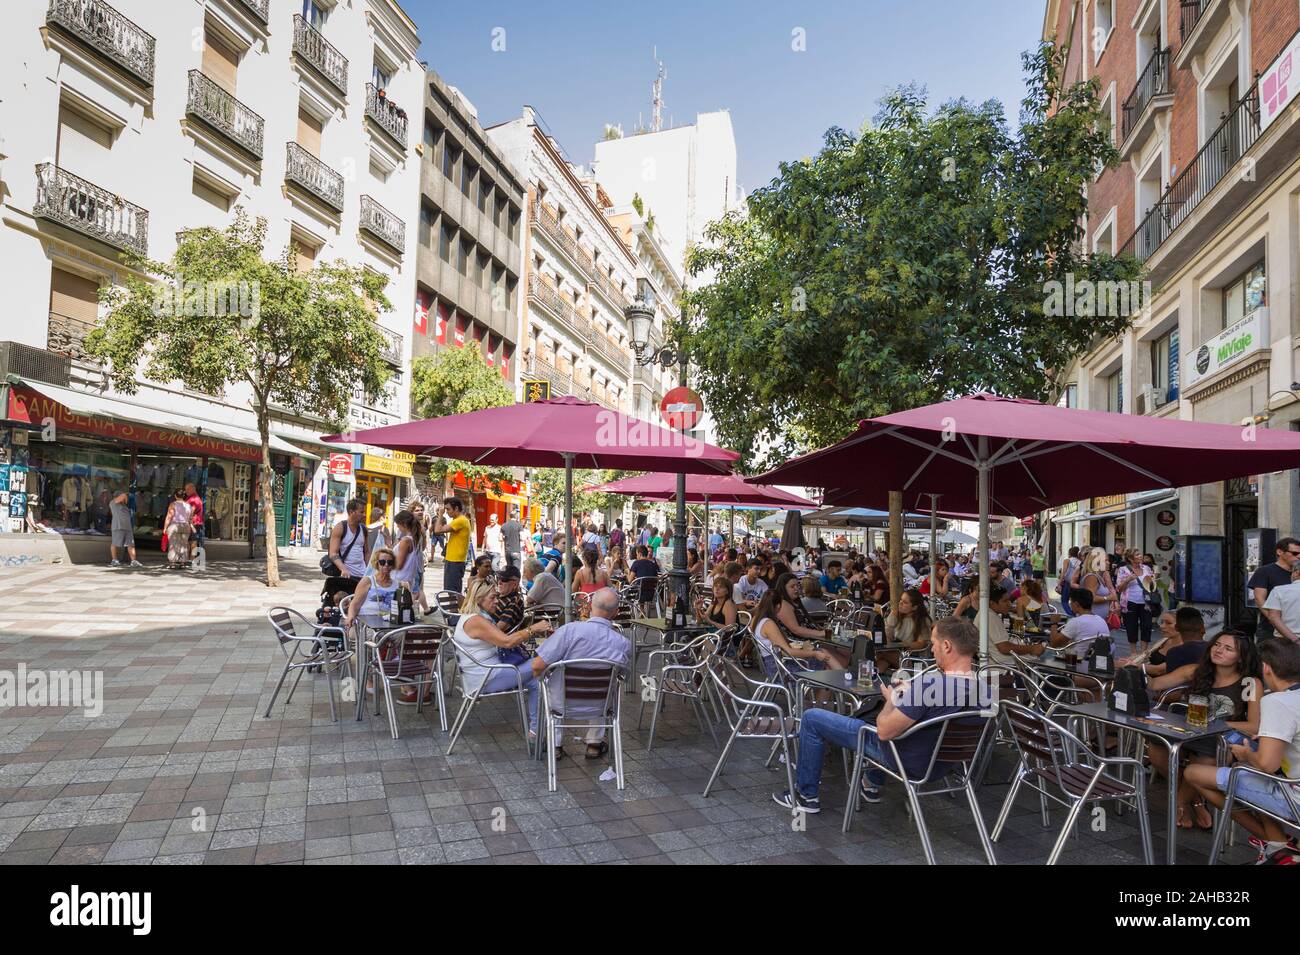 People sitting underneath large umbrellas in a pavement cafe in Madrid, Spain Stock Photo